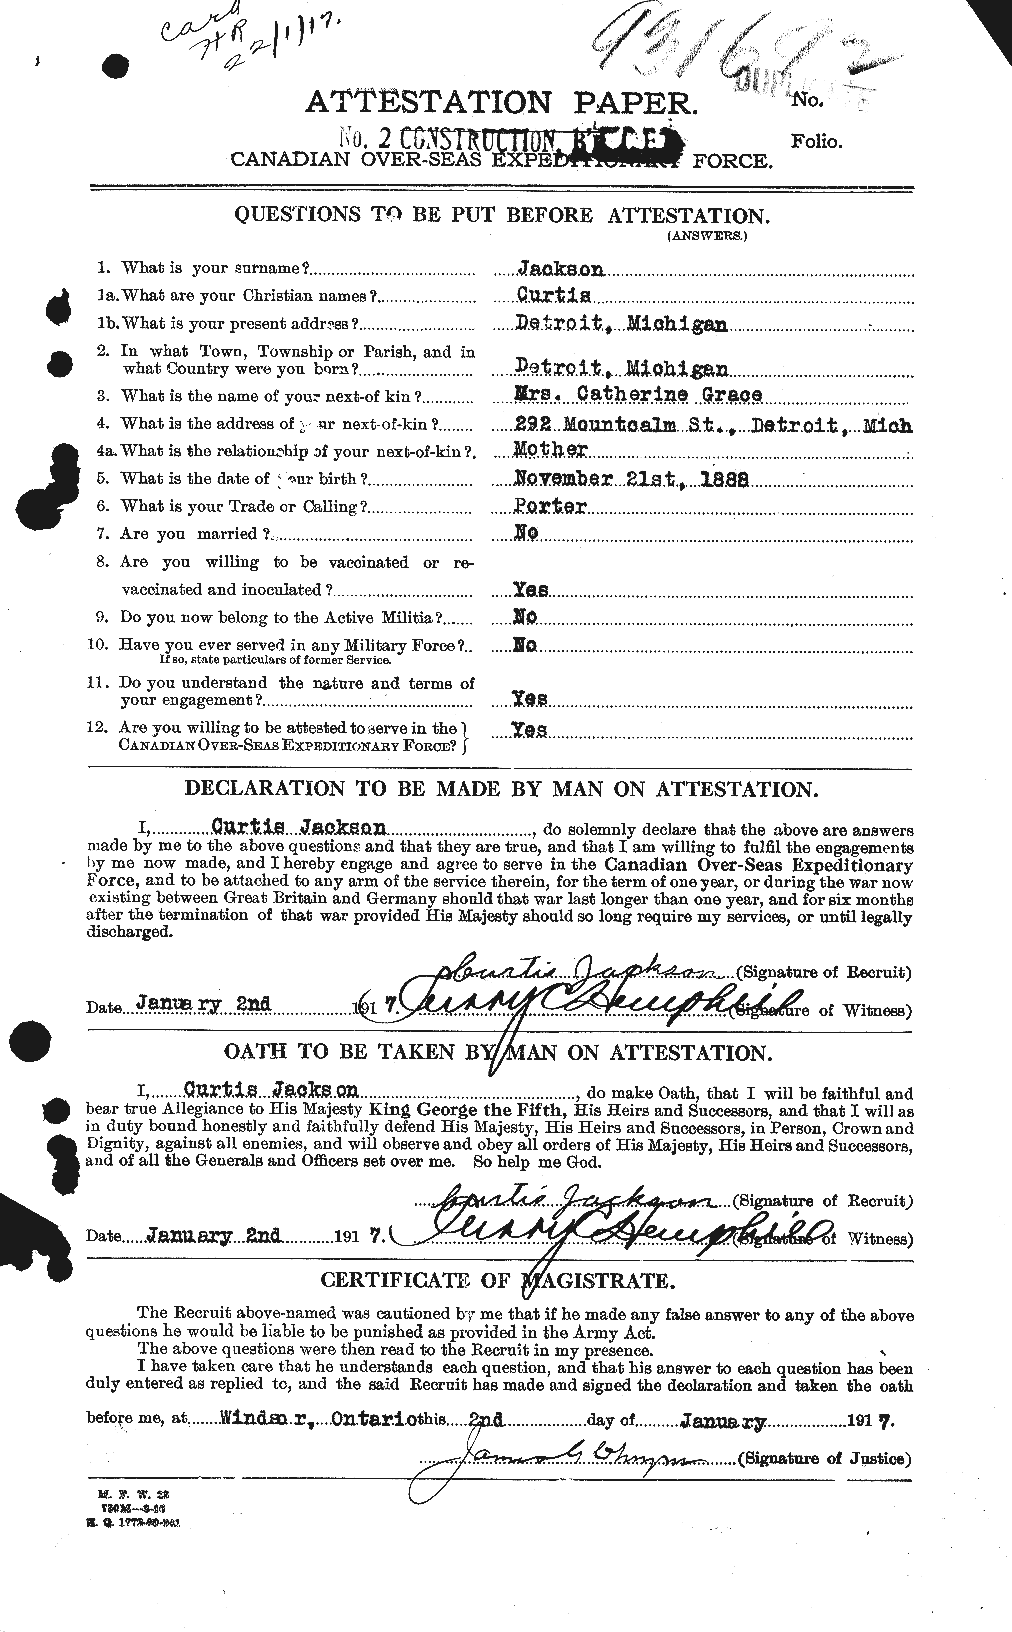 Personnel Records of the First World War - CEF 411854a